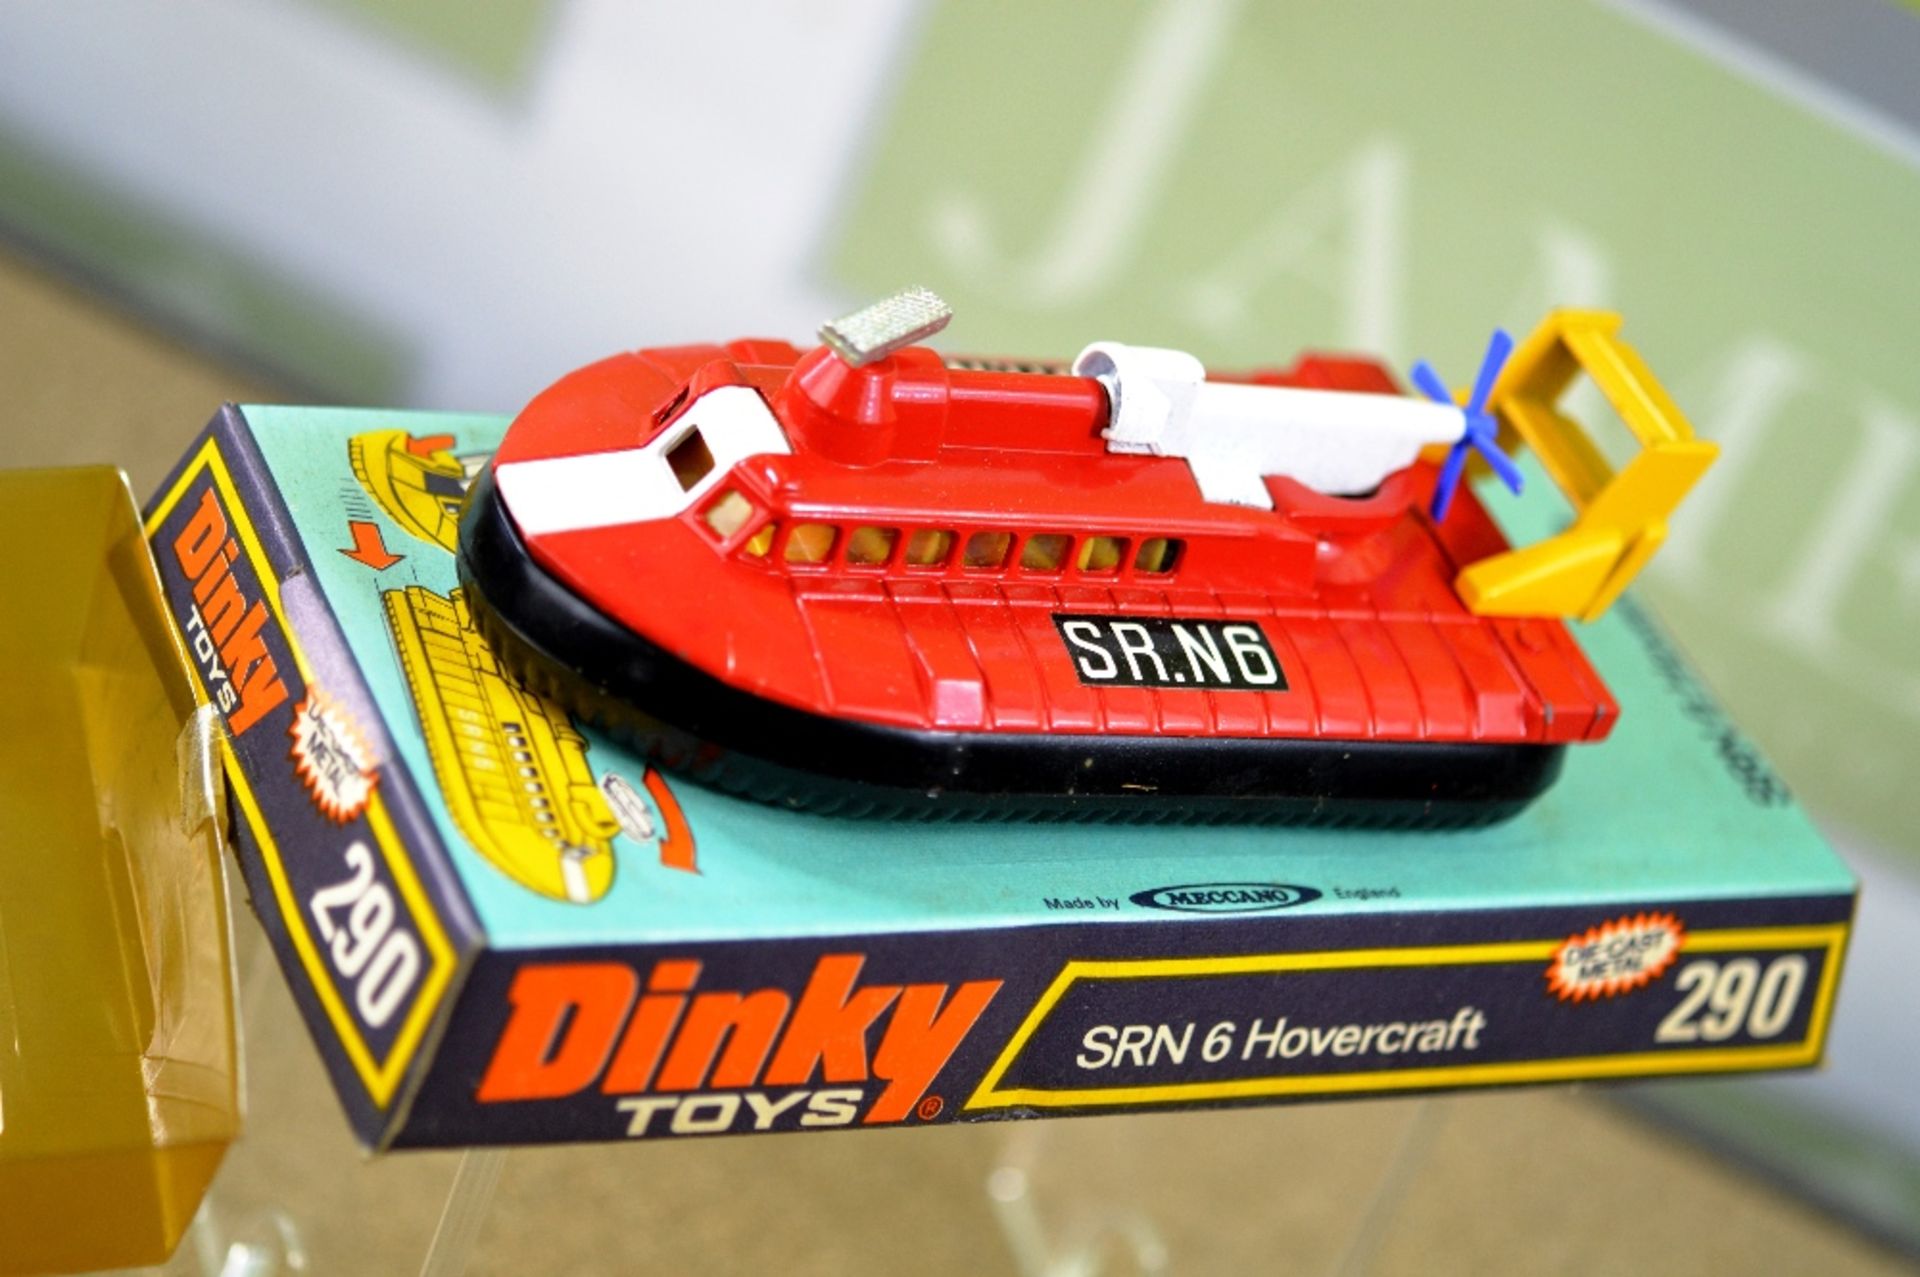 Dinky Toys 290 SRN 6 Hovercraft  in original packaging from private collector for 30 years